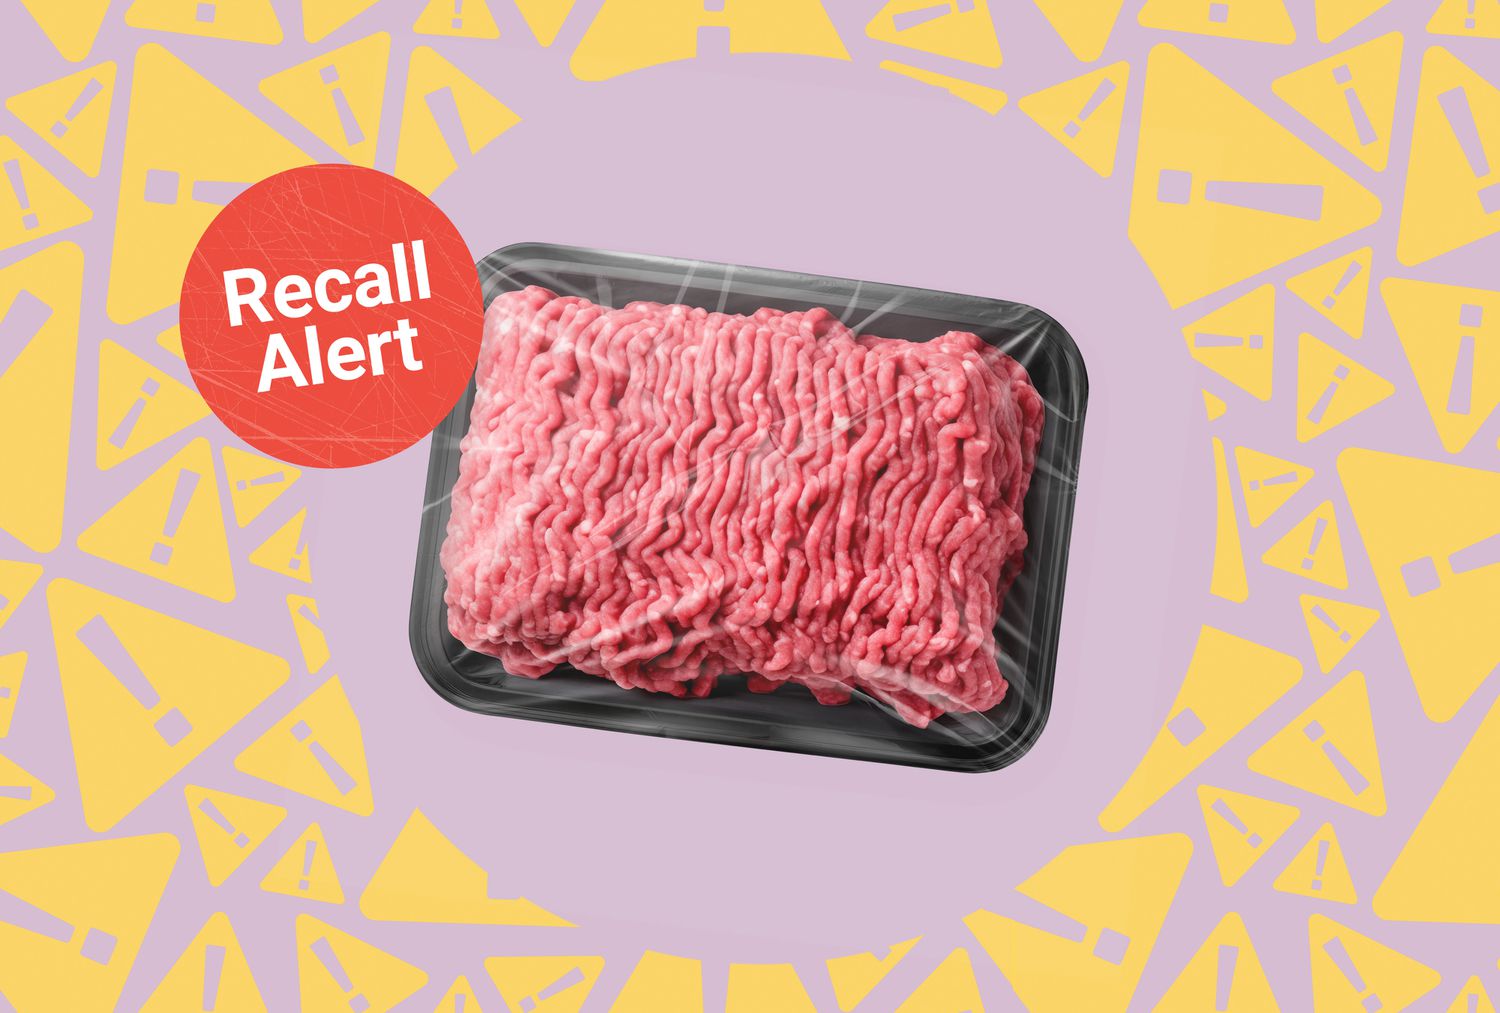 Check Your Freezer: Urgent Alert on Ground Beef for E. coli Risk – What You Need to Know Now